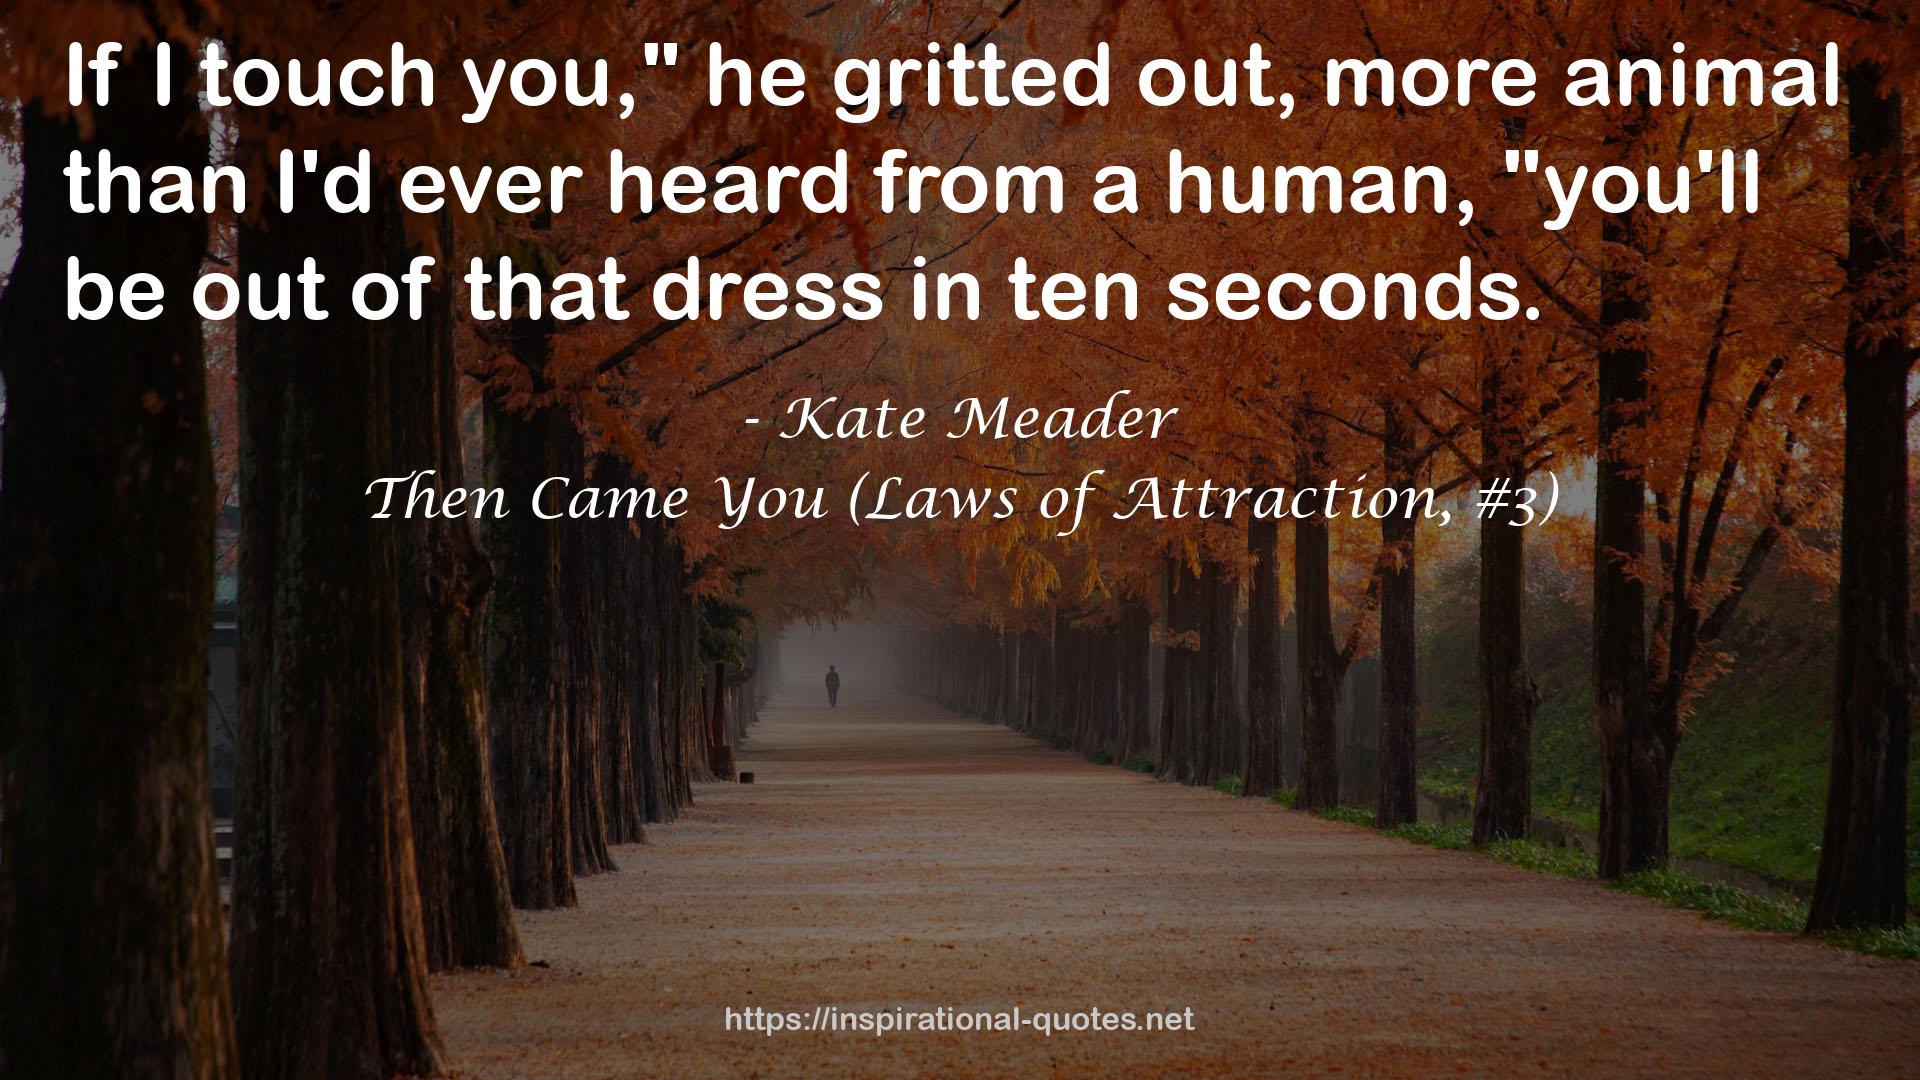 Then Came You (Laws of Attraction, #3) QUOTES